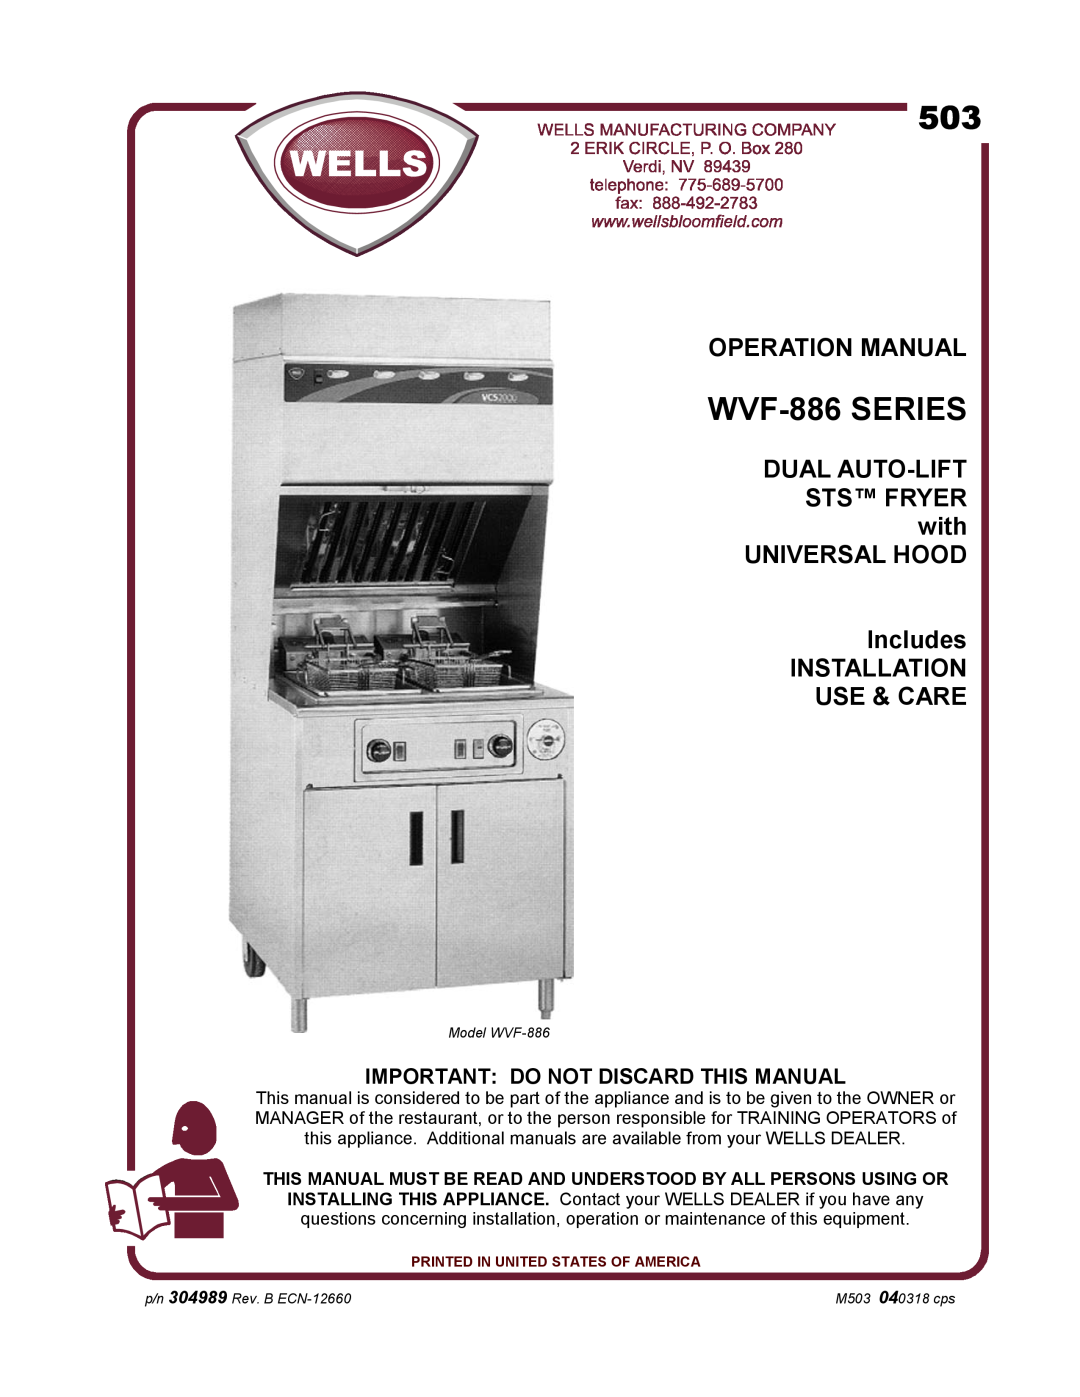 Wells WVF-886 operation manual Operation Manual, DUAL AUTO-LIFT STS FRYER with UNIVERSAL HOOD Includes INSTALLATION 